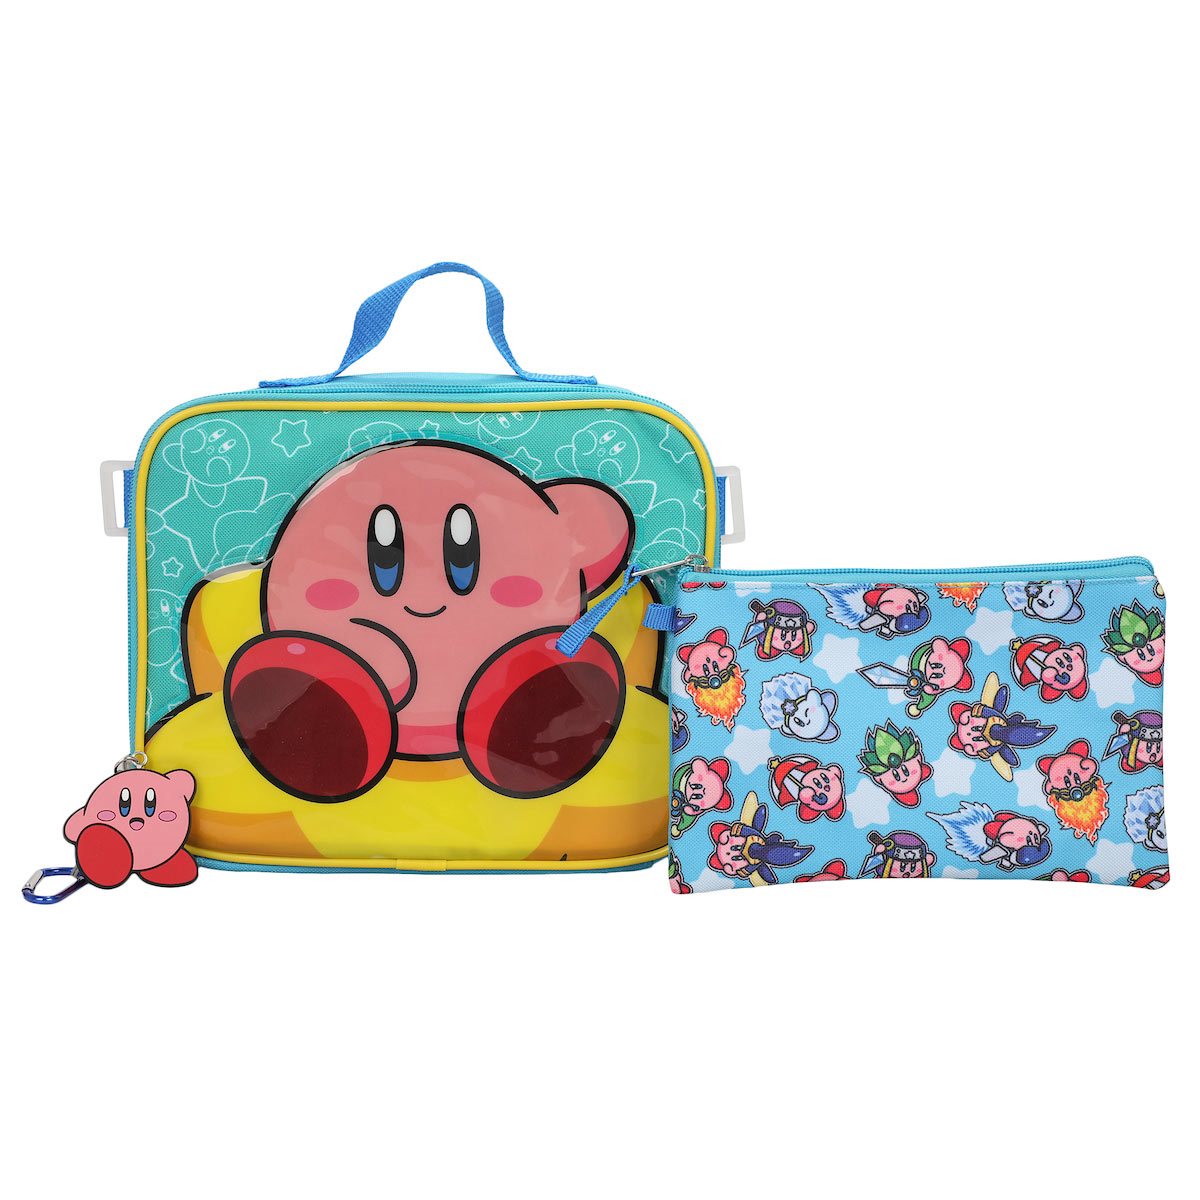 Kirby 5-Piece Set: 16 Backpack, Lunchbox, Utility Case, Rubber Keychain, and Carabiner